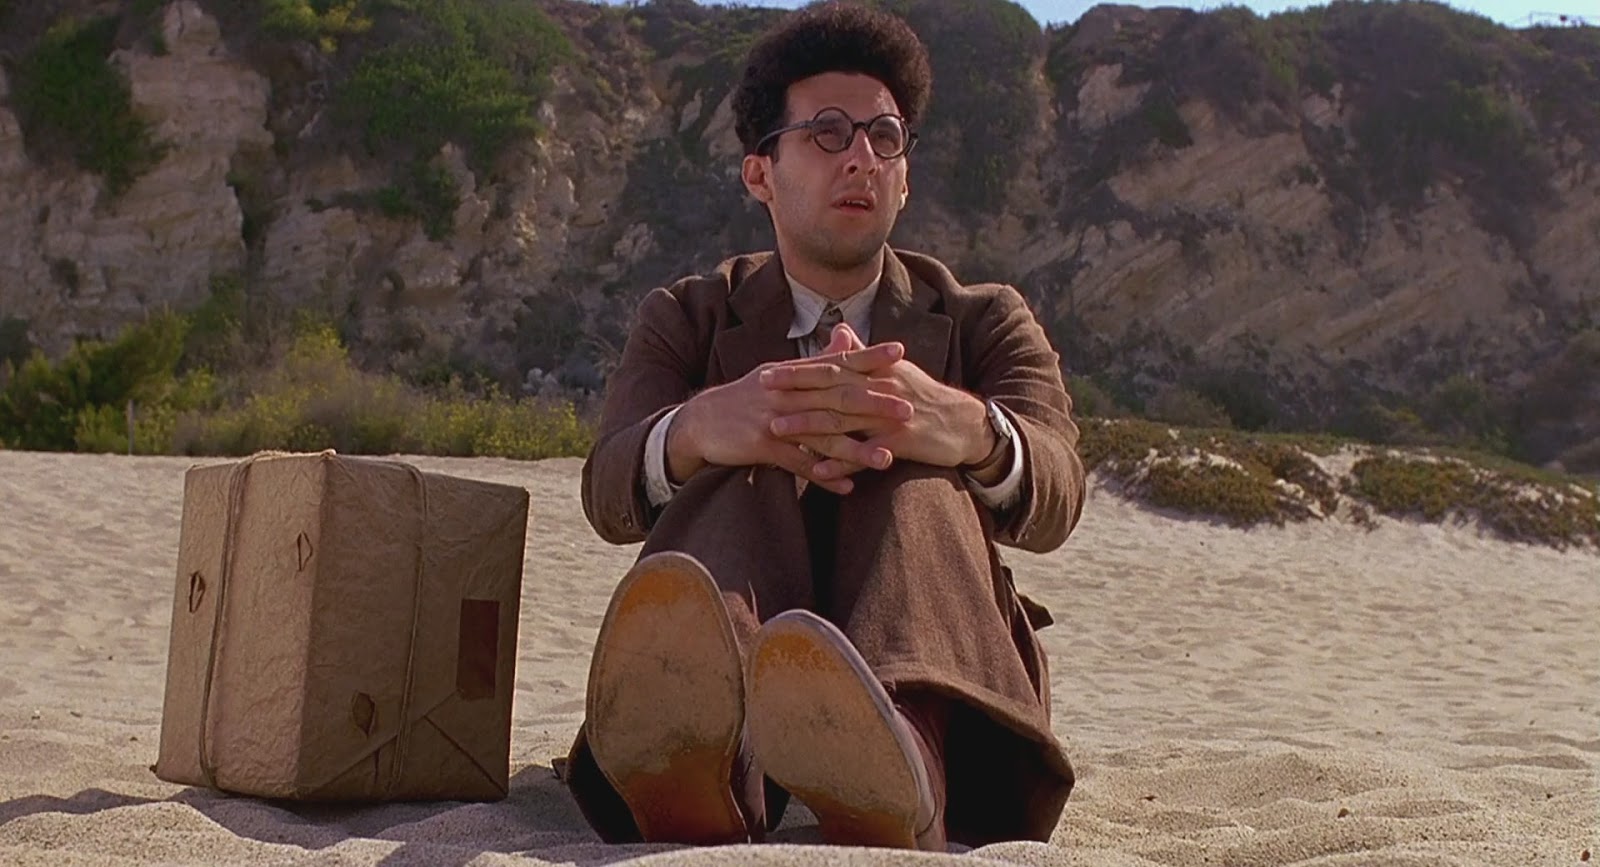 Barton Fink 1991 Full Movie Online In Hd Quality